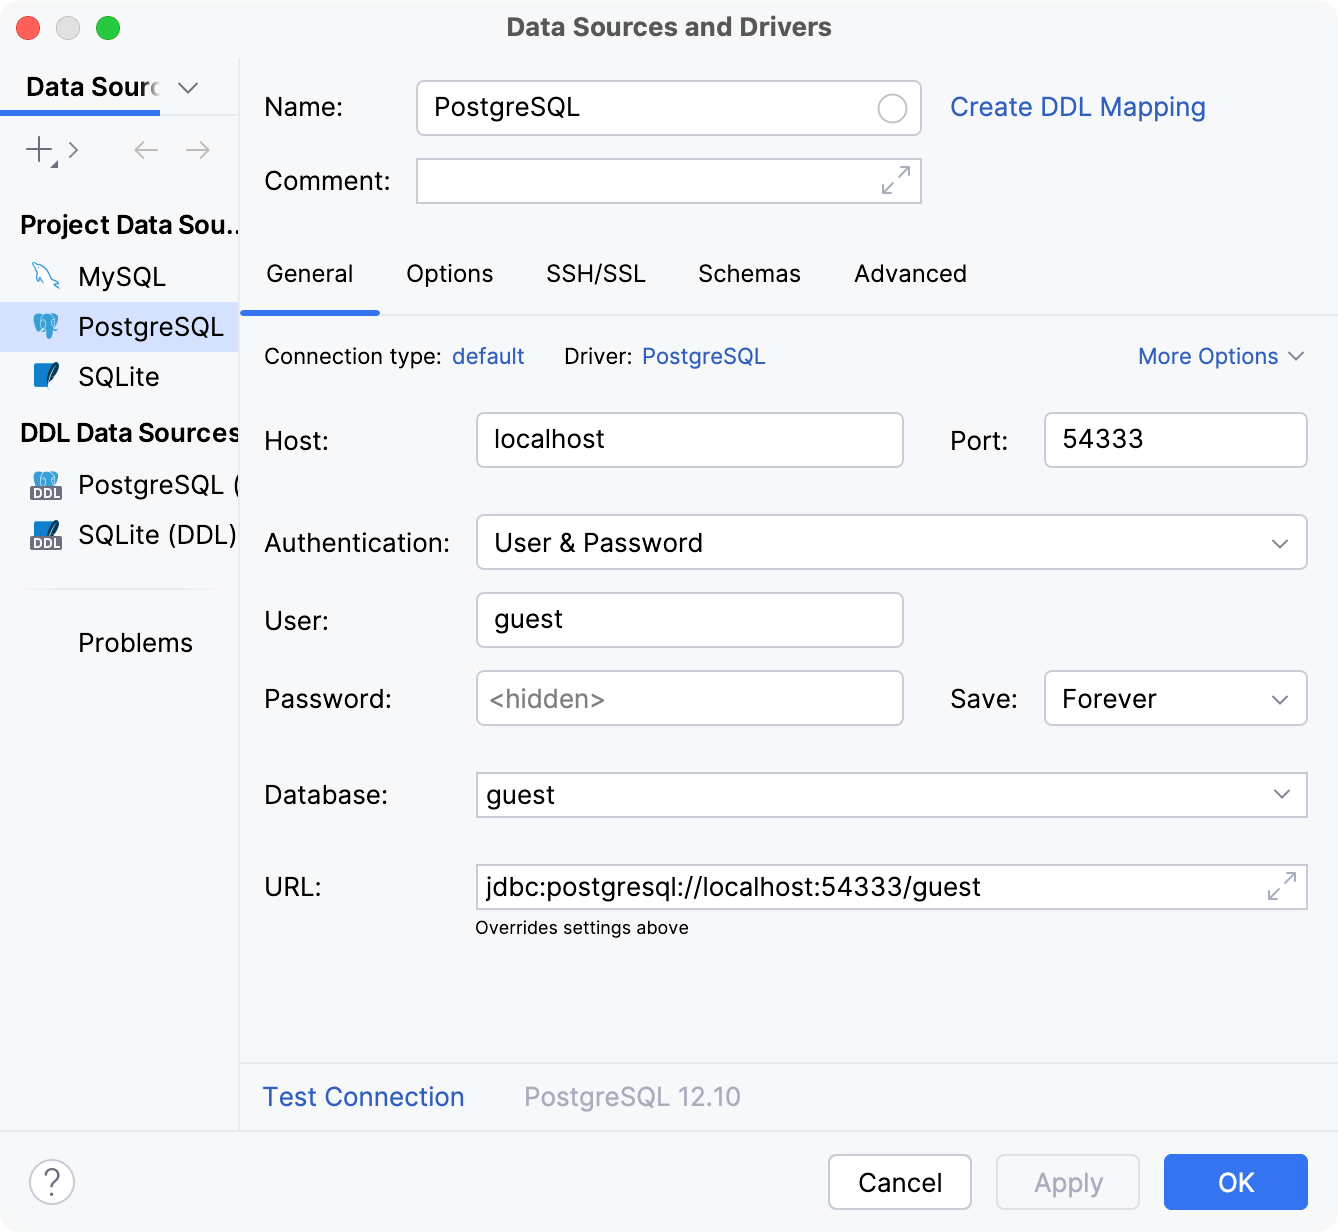 Data Source and Drivers dialog: General tab of Data Sources settings